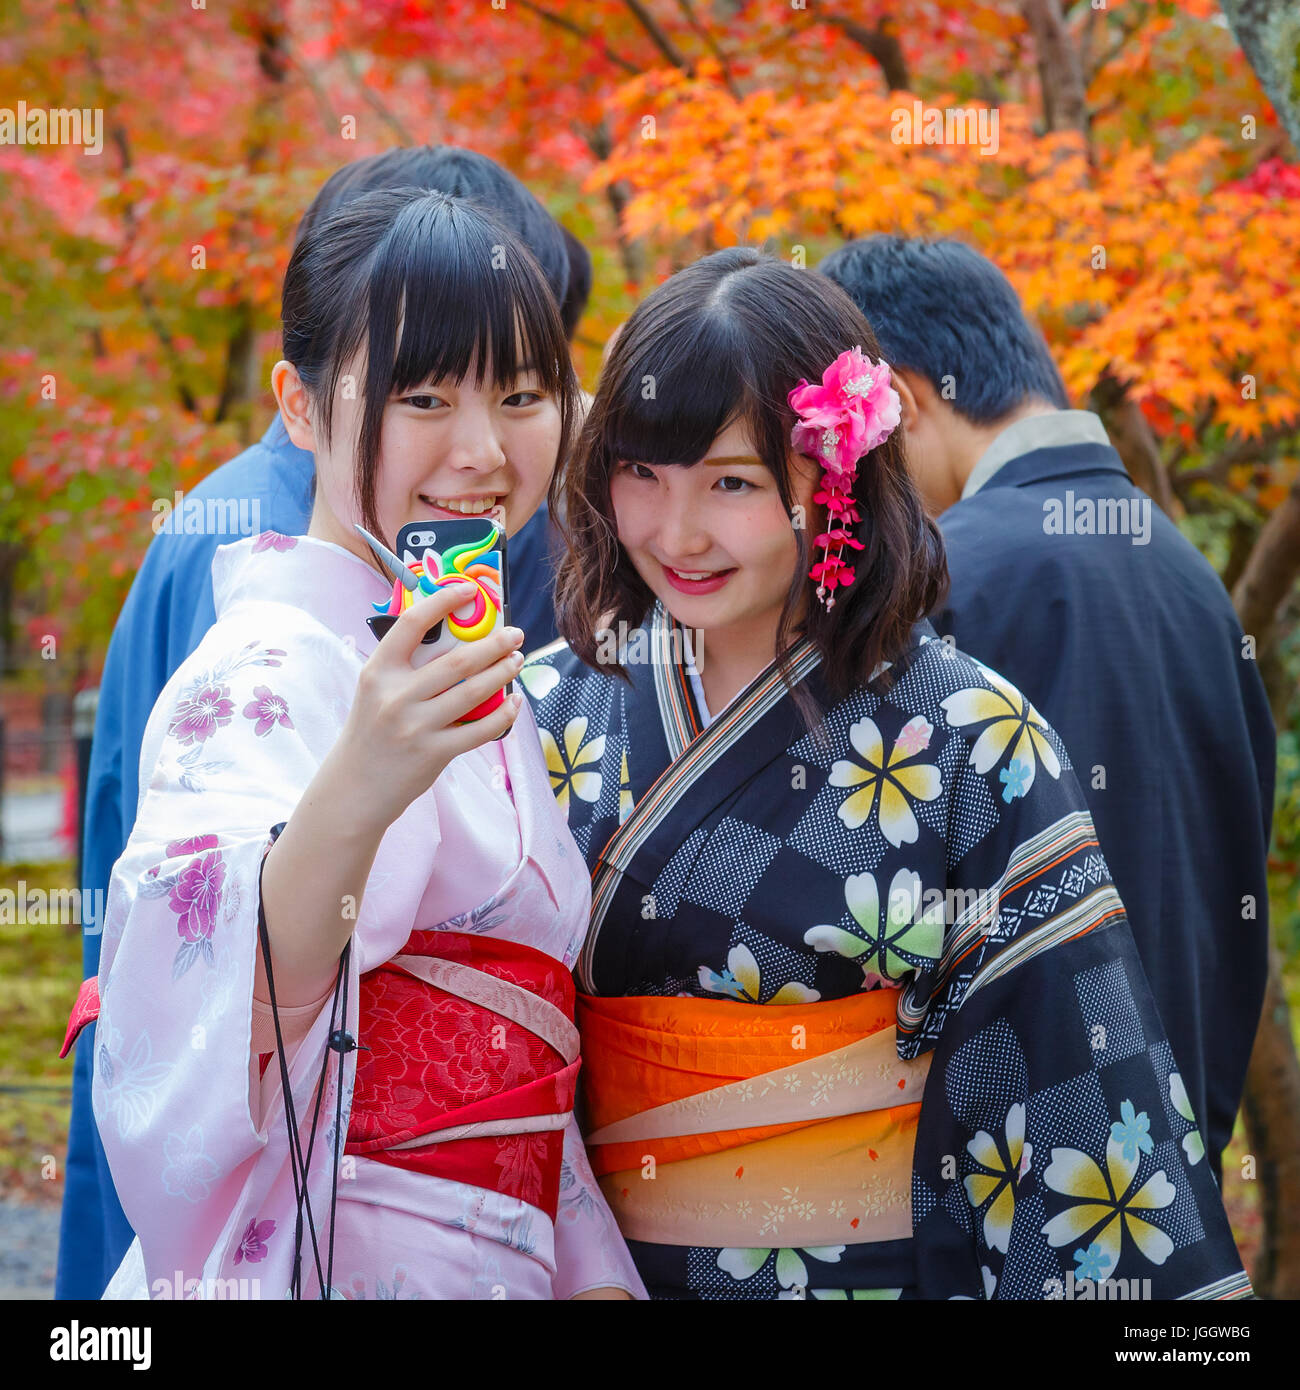 KYOTO, JAPAN - NOVEMBER 22 2015: Unidentified young Japanese women take selfie with a mobilephone Stock Photo